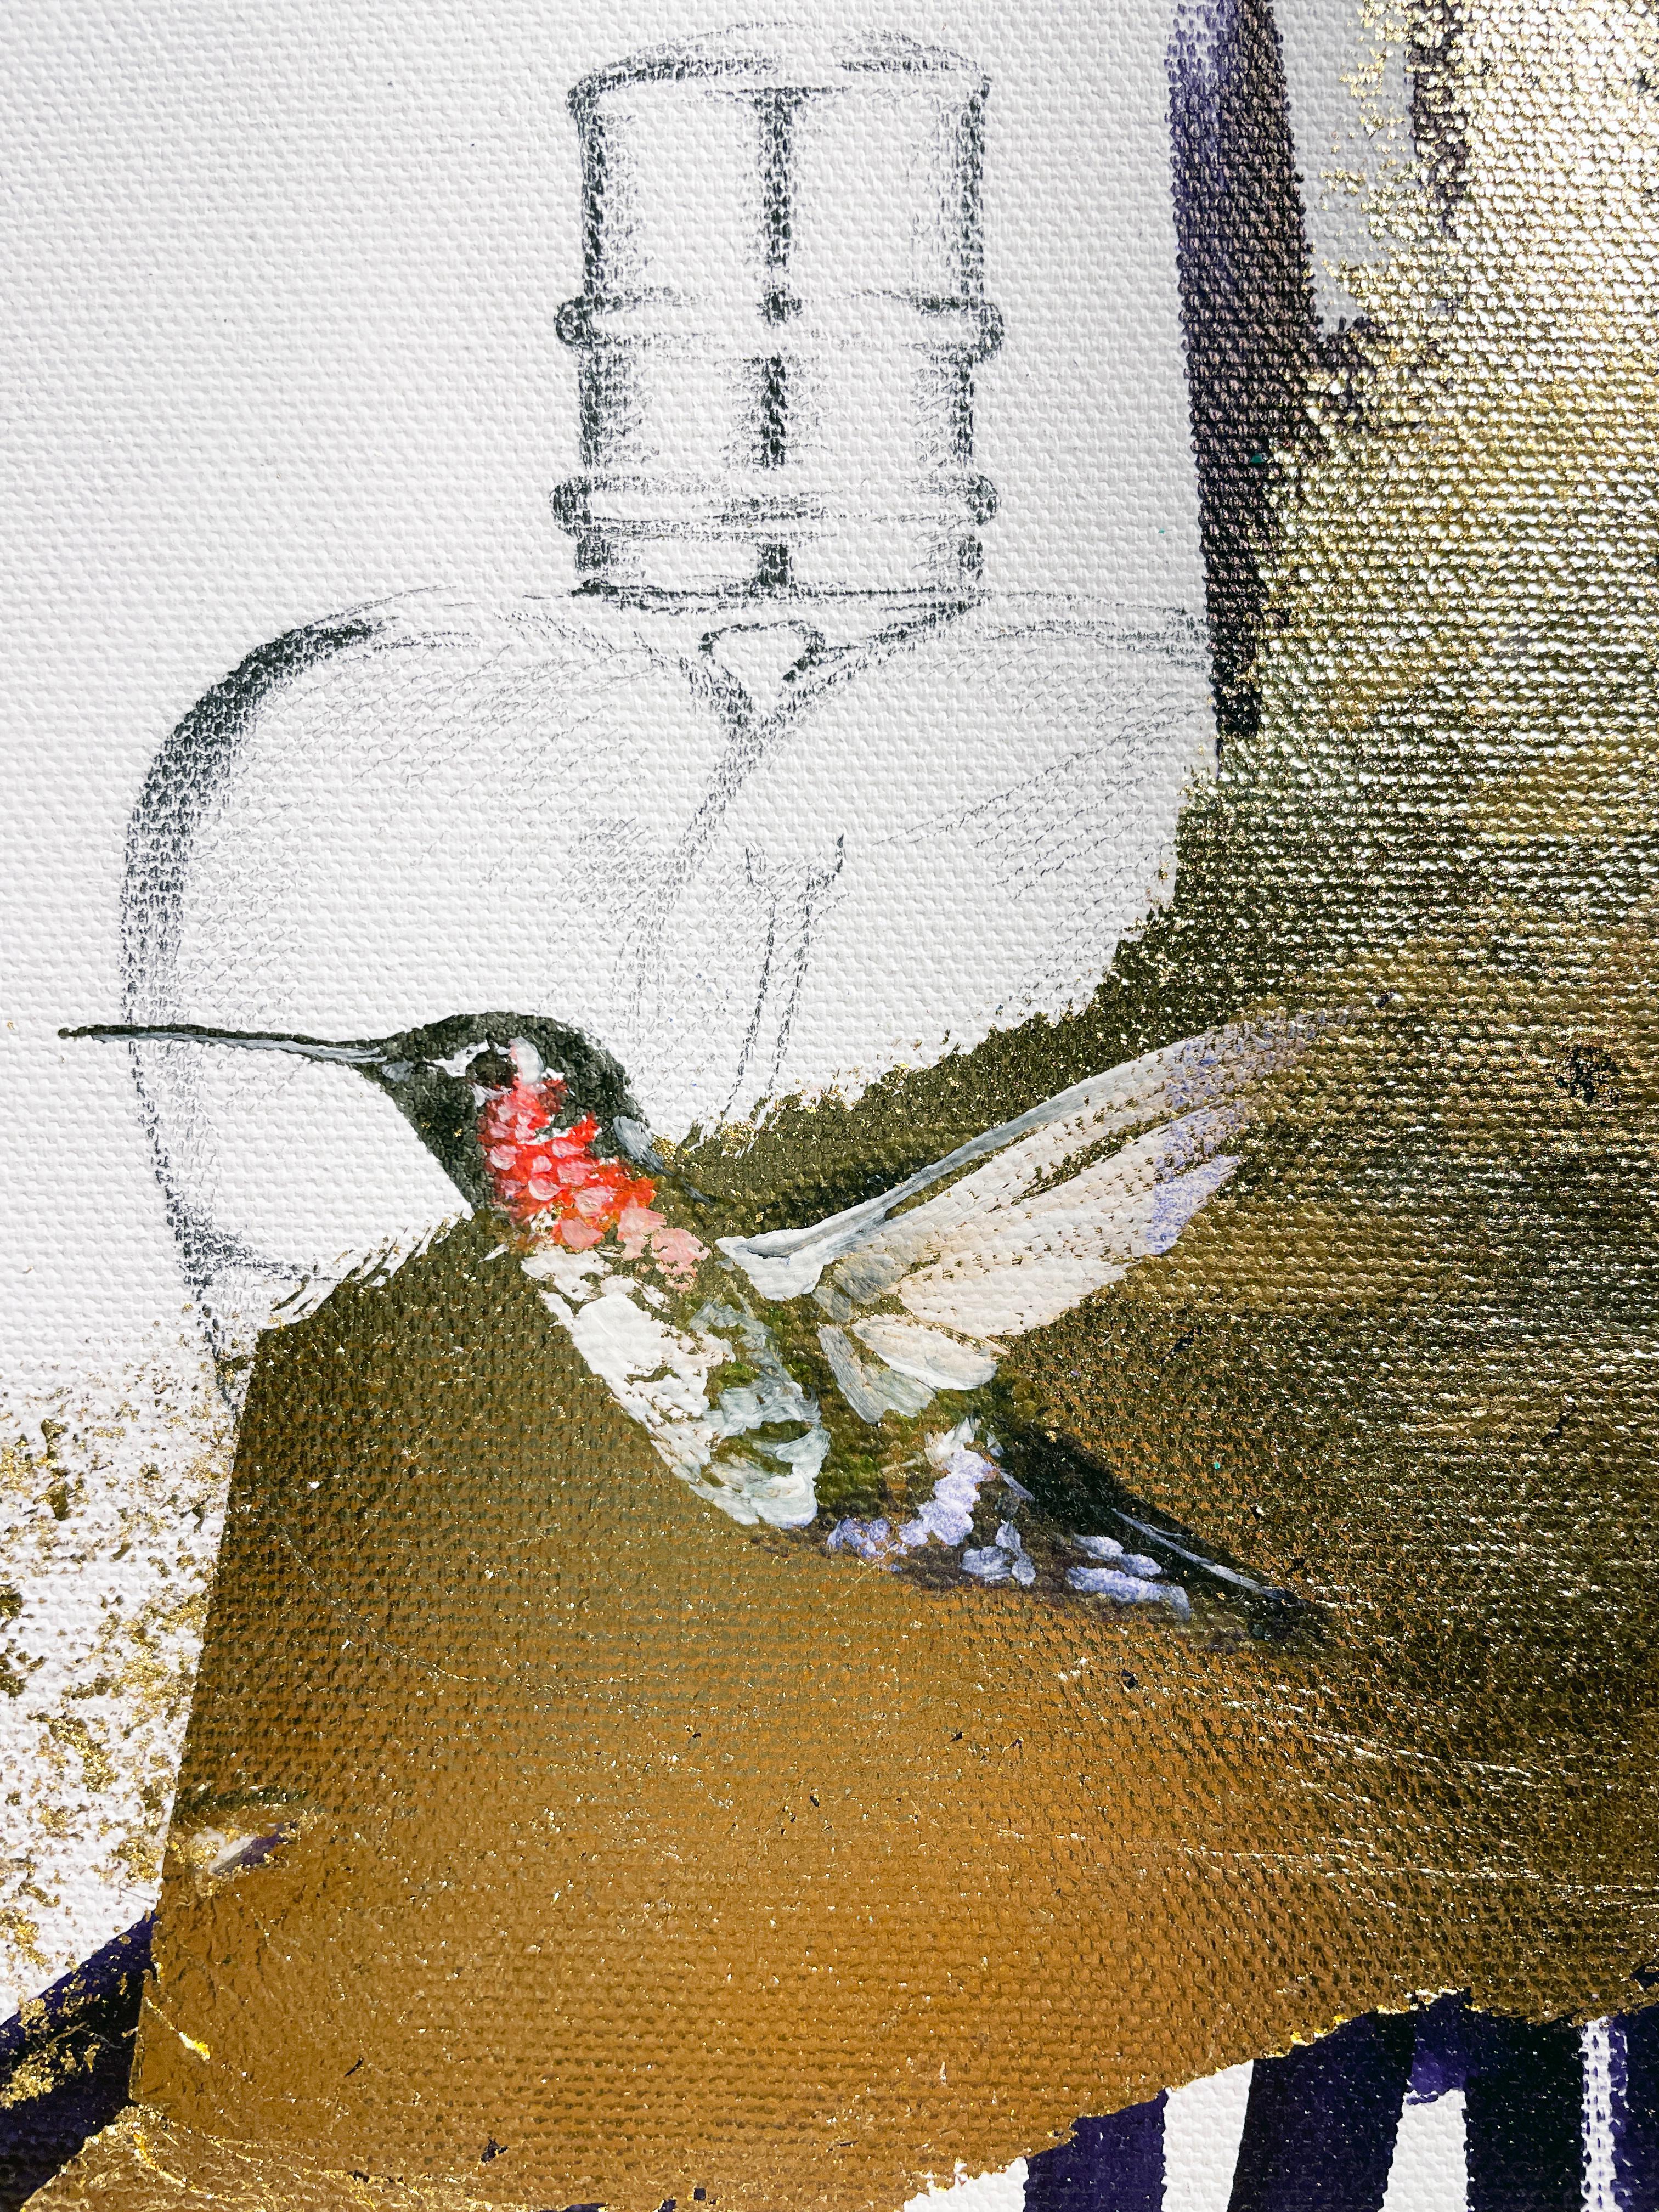 The Gift - Still Life with Ruby Throated Hummingbird and Perfume Bottle, Gold - Painting by Felipe Alfaro